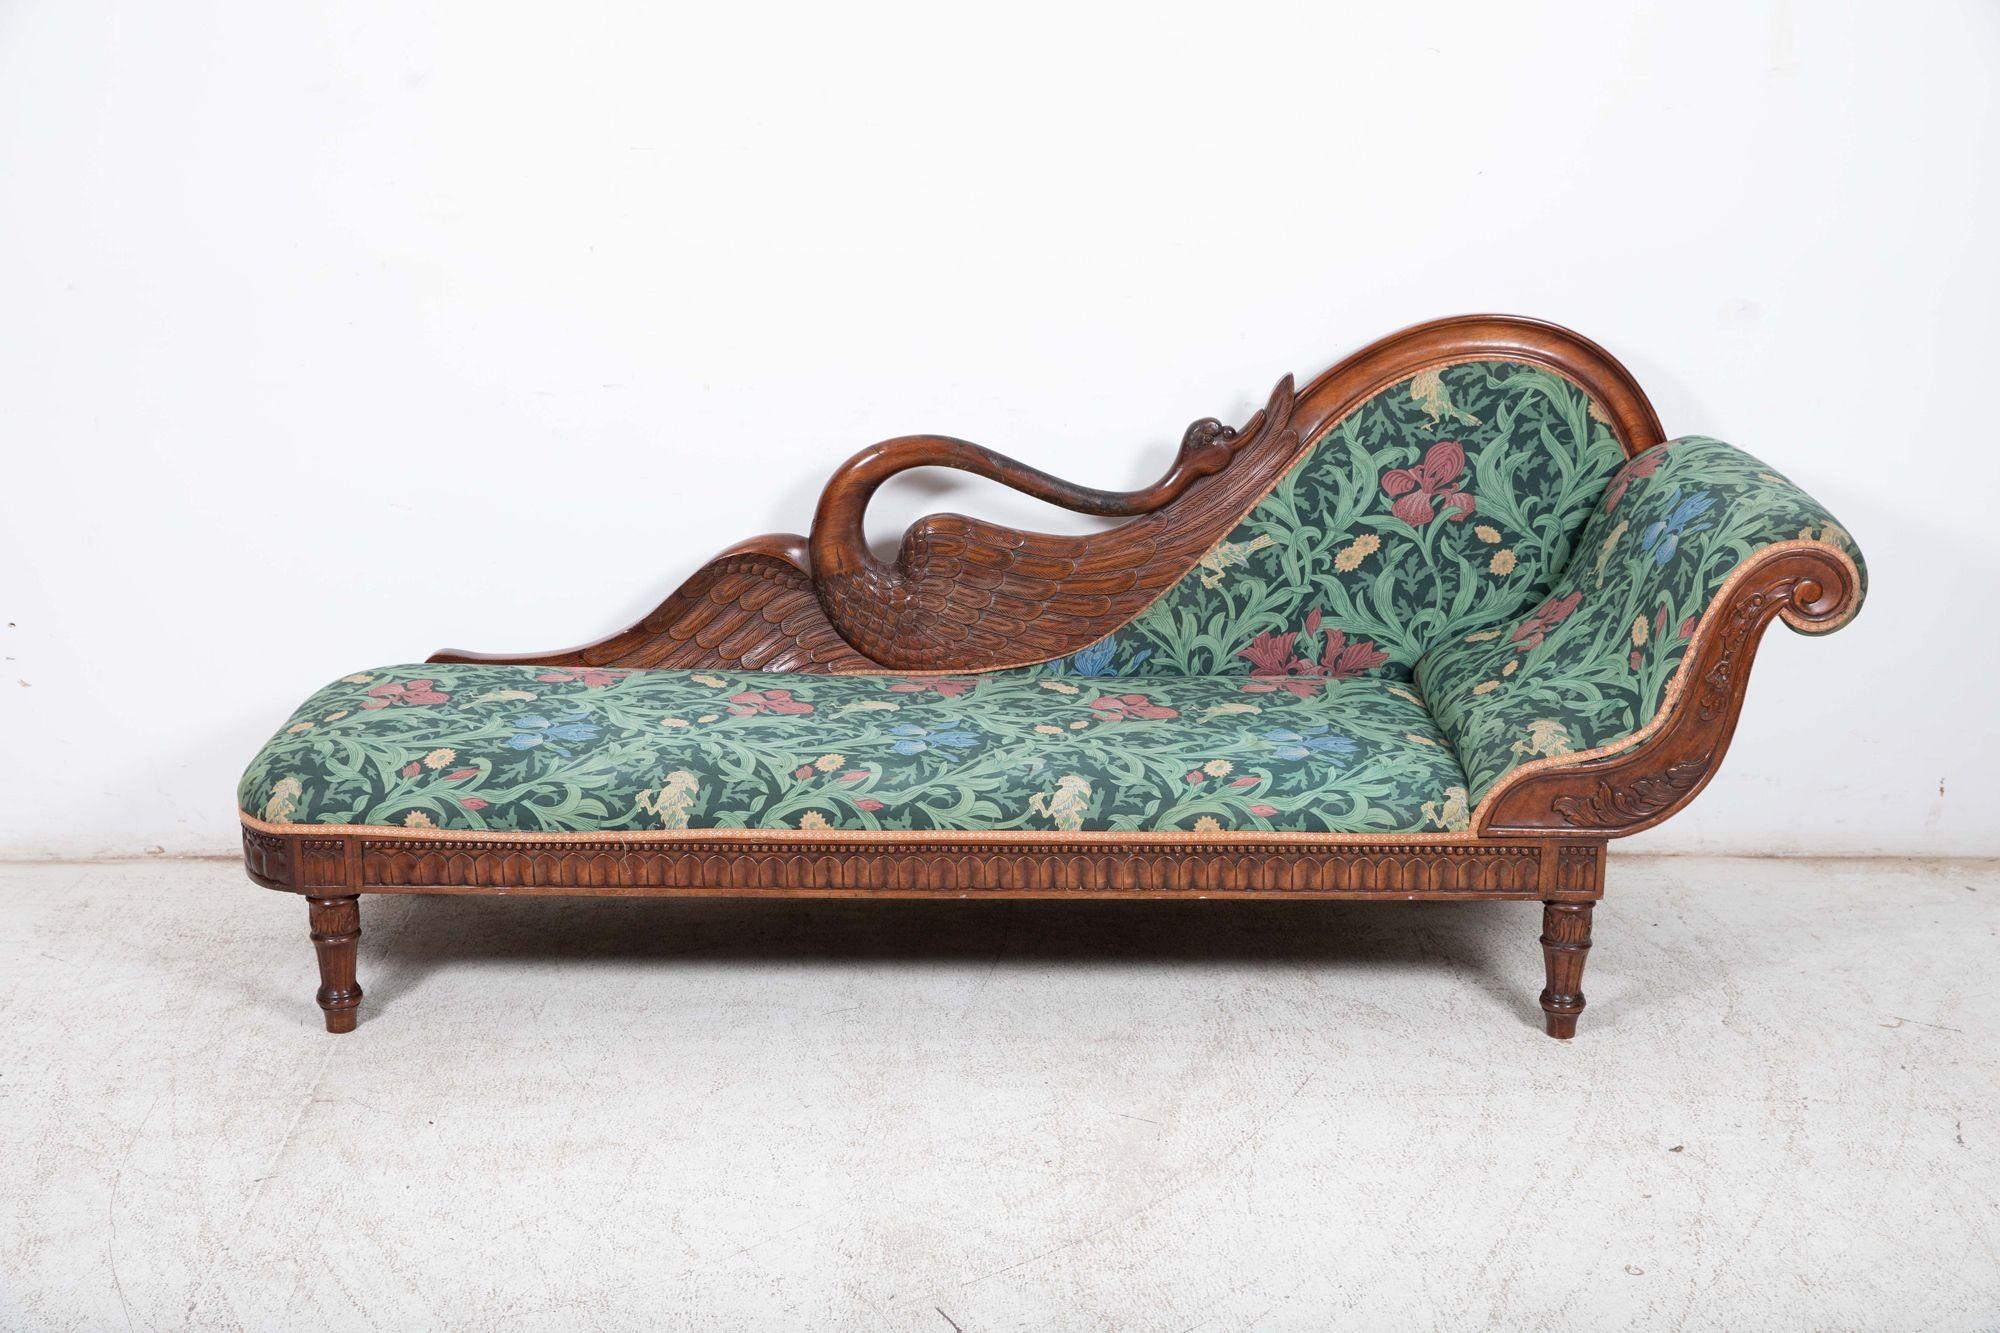 Mid-19th Century 19thC French Empire Walnut Chaise Lounge / Daybed